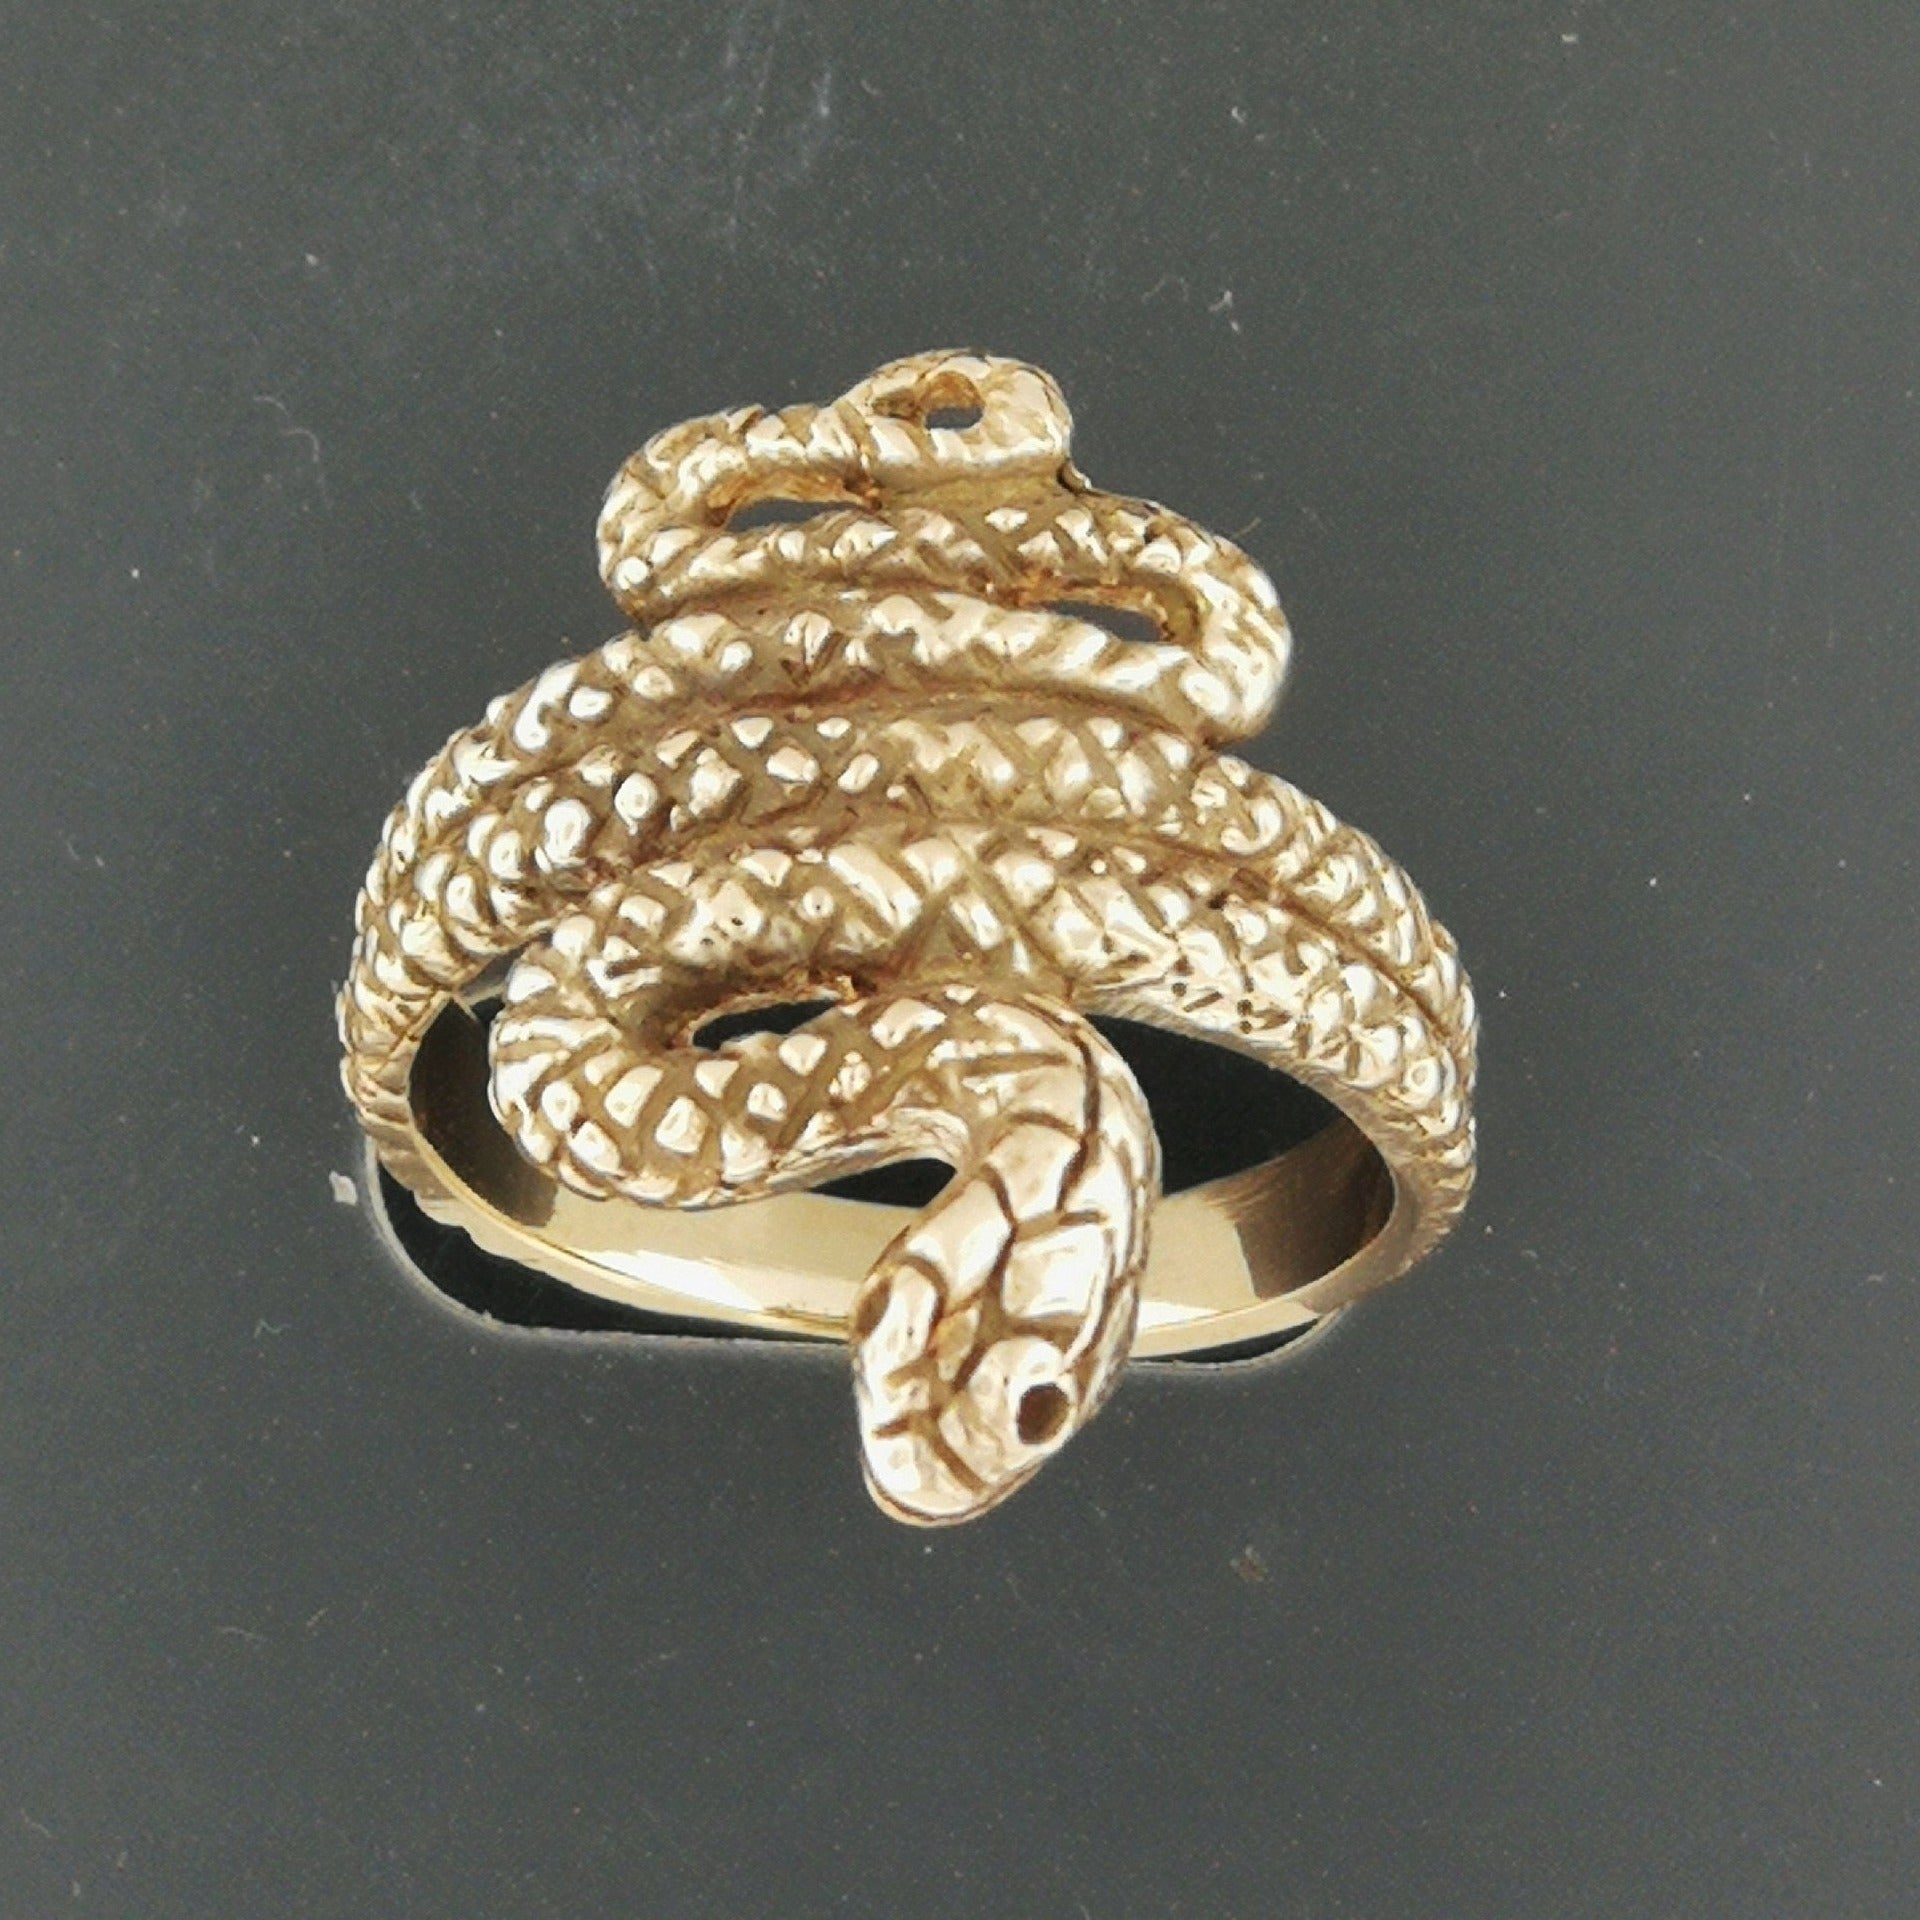 Coiled Snake Ring in 925 Silver or Bronze, 3D Snake Ring Jewellery, Bronze Reptile Rings, Delicate Snake Rings, Egyptian Snake Ring Jewelry, 50s Snake Ring, Bronze Snake Ring, Adjustable Serpent Ring, Bronze Serpent Ring, Vintage Snake Ring